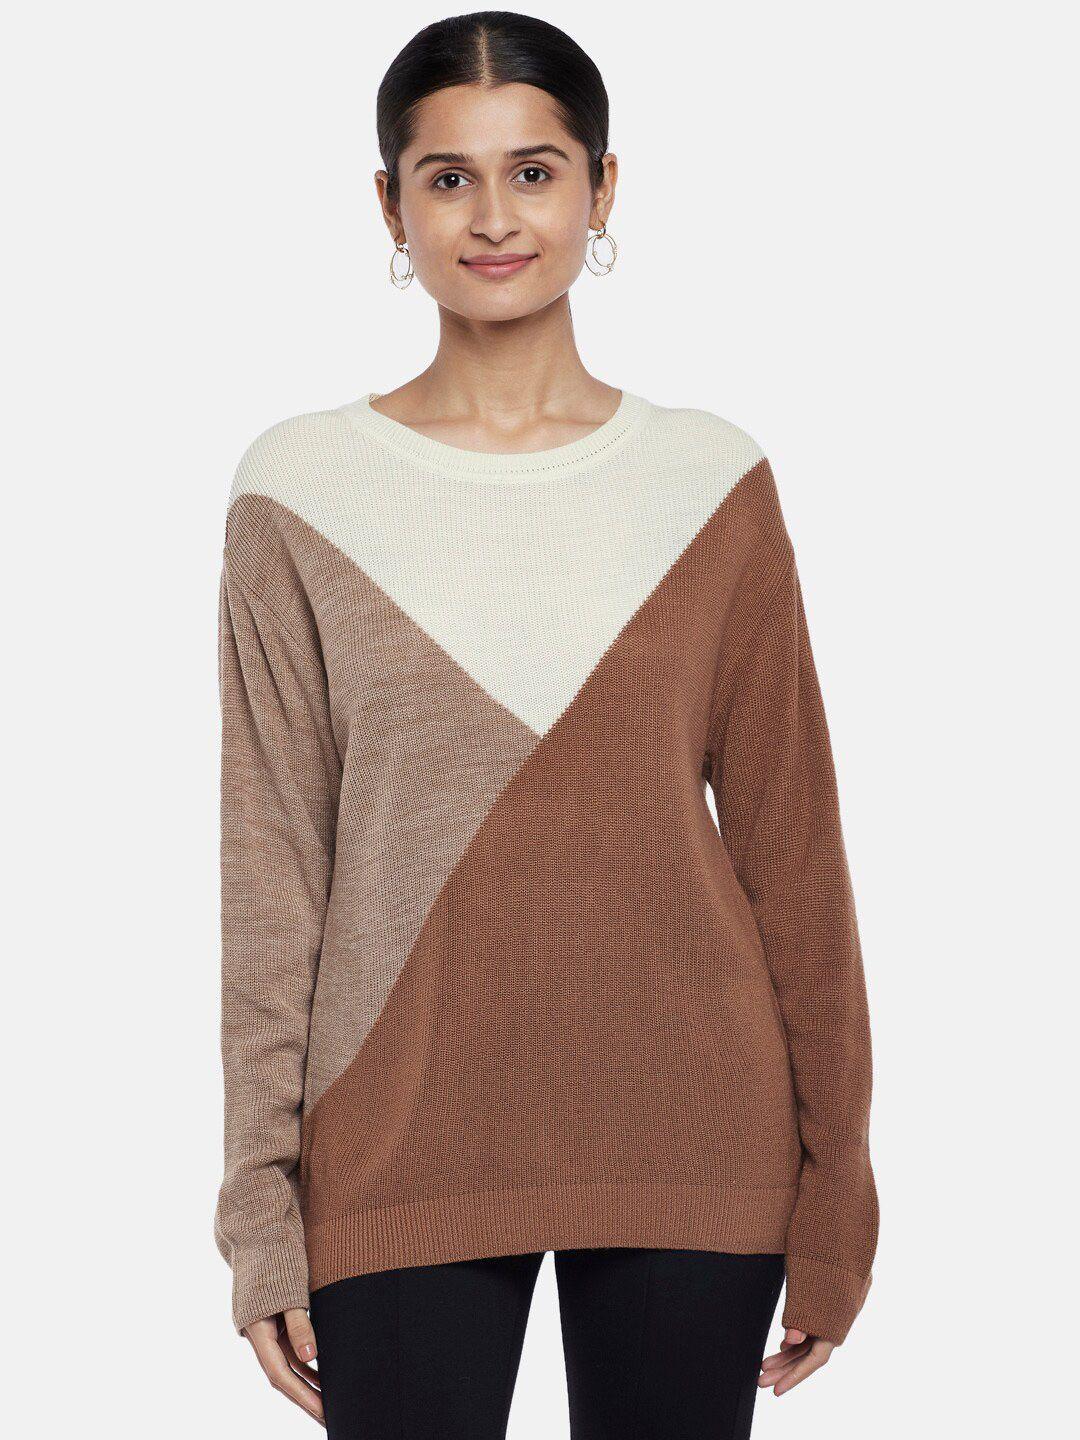 annabelle by pantaloons women brown & white colourblocked longline pullover